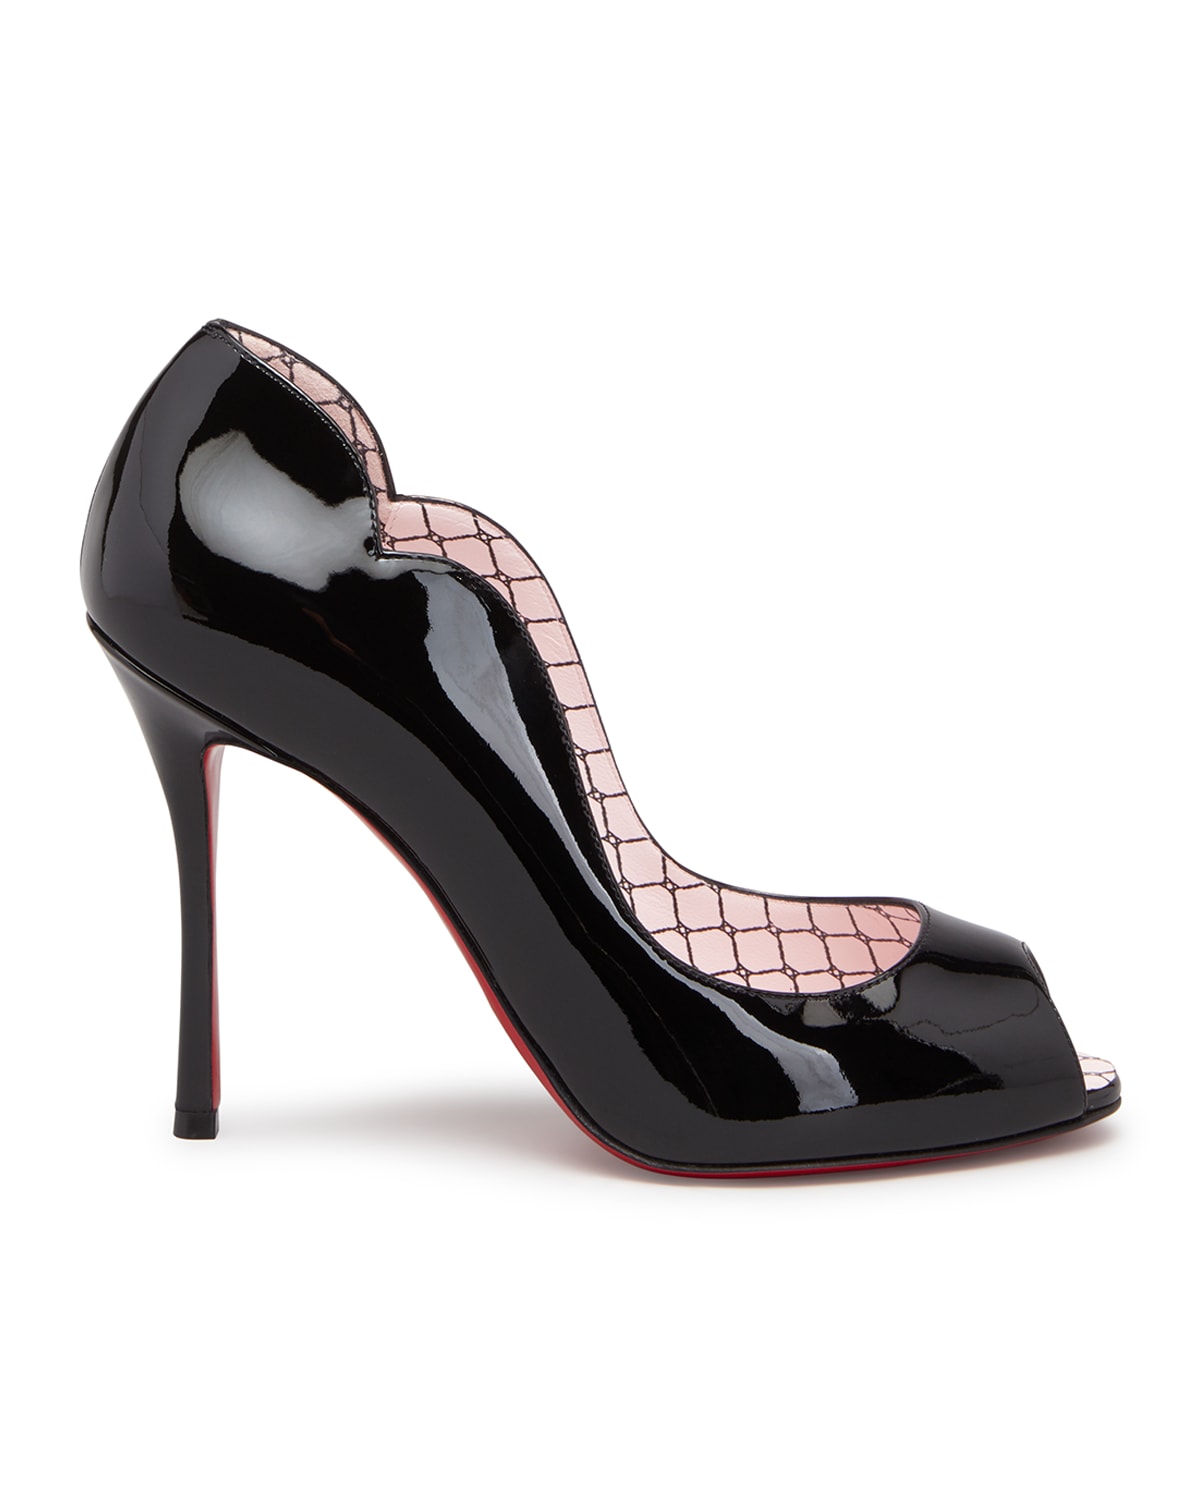 Christian Louboutin Chick Up Red Sole Pumps